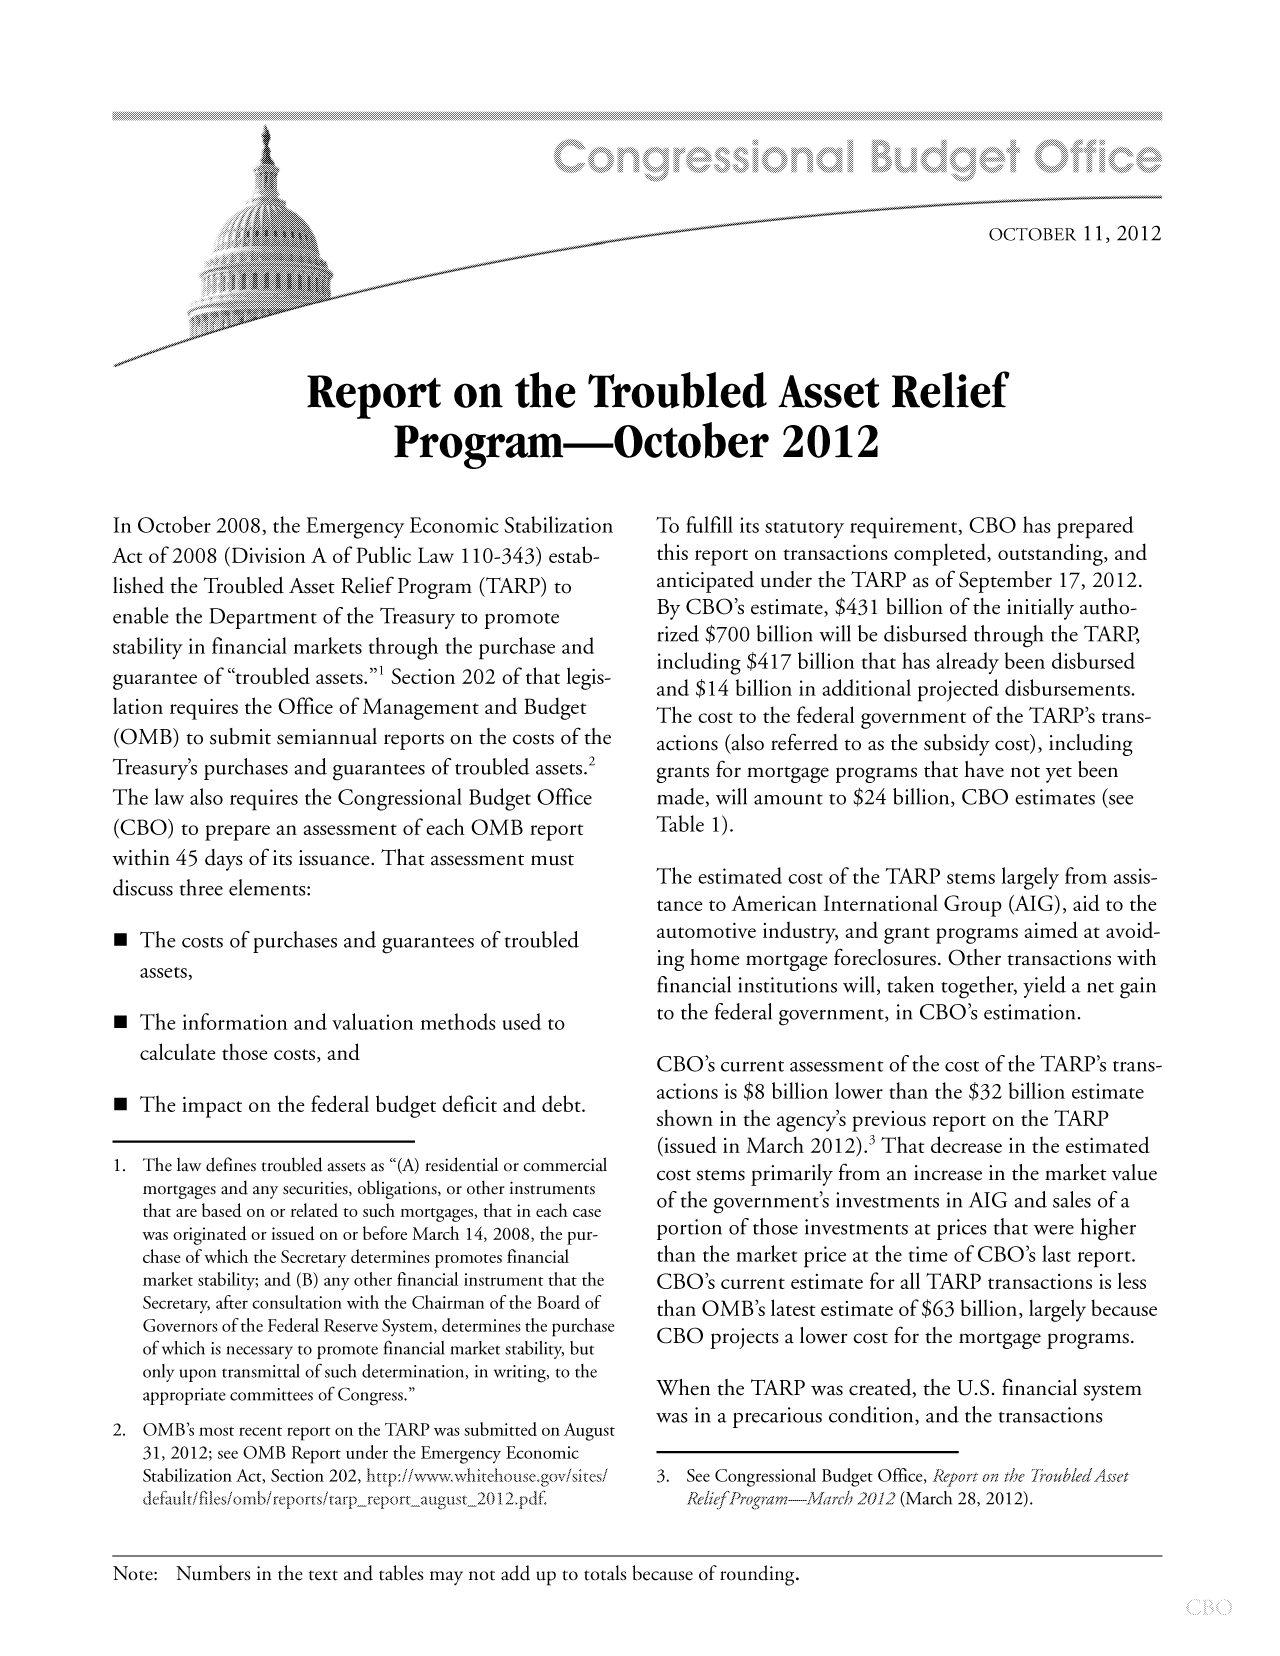 handle is hein.congrec/cbo10920 and id is 1 raw text is: OCTOBER 11, 2012
Report on the Troubled Asset Relief
Program-October 2012

In October 2008, the Emergency Economic Stabilization
Act of 2008 (Division A of Public Law 110-343) estab-
lished the Troubled Asset Relief Program (TARP) to
enable the Department of the Treasury to promote
stability in financial markets through the purchase and
guarantee of troubled assets.' Section 202 of that legis-
lation requires the Office of Management and Budget
(OMB) to submit semiannual reports on the costs of the
Treasury's purchases and guarantees of troubled assets.2
The law also requires the Congressional Budget Office
(CBO) to prepare an assessment of each OMB report
within 45 days of its issuance. That assessment must
discuss three elements:
 The costs of purchases and guarantees of troubled
assets,
 The information and valuation methods used to
calculate those costs, and
  The impact on the federal budget deficit and debt.
1. The law defines troubled assets as (A) residential or commercial
mortgages and any securities, obligations, or other instruments
that are based on or related to such mortgages, that in each case
was originated or issued on or before March 14, 2008, the pur-
chase of which the Secretary determines promotes financial
market stability; and (B) any other financial instrument that the
Secretary, after consultation with the Chairman of the Board of
Governors of the Federal Reserve System, determines the purchase
of which is necessary to promote financial market stability, but
only upon transmittal of such determination, in writing, to the
appropriate committees of Congress.
2. OMB's most recent report on the TARP was submitted on August
31, 2012; see OMB Report under the Emergency Economic
Stabilization Act, Section 202, http://v- whitehouse.gov/sites/
default/files/ombi rep orts/tarp-rep o rt-august_2012, p df.

To fulfill its statutory requirement, CBO has prepared
this report on transactions completed, outstanding, and
anticipated under the TARP as of September 17, 2012.
By CBO's estimate, $431 billion of the initially autho-
rized $700 billion will be disbursed through the TARP,
including $417 billion that has already been disbursed
and $14 billion in additional projected disbursements.
The cost to the federal government of the TARP's trans-
actions (also referred to as the subsidy cost), including
grants for mortgage programs that have not yet been
made, will amount to $24 billion, CBO estimates (see
Table 1).
The estimated cost of the TARP stems largely from assis-
tance to American International Group (AIG), aid to the
automotive industry, and grant programs aimed at avoid-
ing home mortgage foreclosures. Other transactions with
financial institutions will, taken together, yield a net gain
to the federal government, in CBO's estimation.
CBO's current assessment of the cost of the TARP's trans-
actions is $8 billion lower than the $32 billion estimate
shown in the agency's previous report on the TARP
(issued in March 2012). That decrease in the estimated
cost stems primarily from an increase in the market value
of the government's investments in AIG and sales of a
portion of those investments at prices that were higher
than the market price at the time of CBO's last report.
CBO's current estimate for all TARP transactions is less
than OMB's latest estimate of $63 billion, largely because
CBO projects a lower cost for the mortgage programs.
When the TARP was created, the U.S. financial system
was in a precarious condition, and the transactions
3. See Congressional Budget Office, Report on the h'oubler/Asset
ReliefProTram--vla ch 2012 (March 28, 2012).

Note: Numbers in the text and tables may not add up to totals because of rounding.


